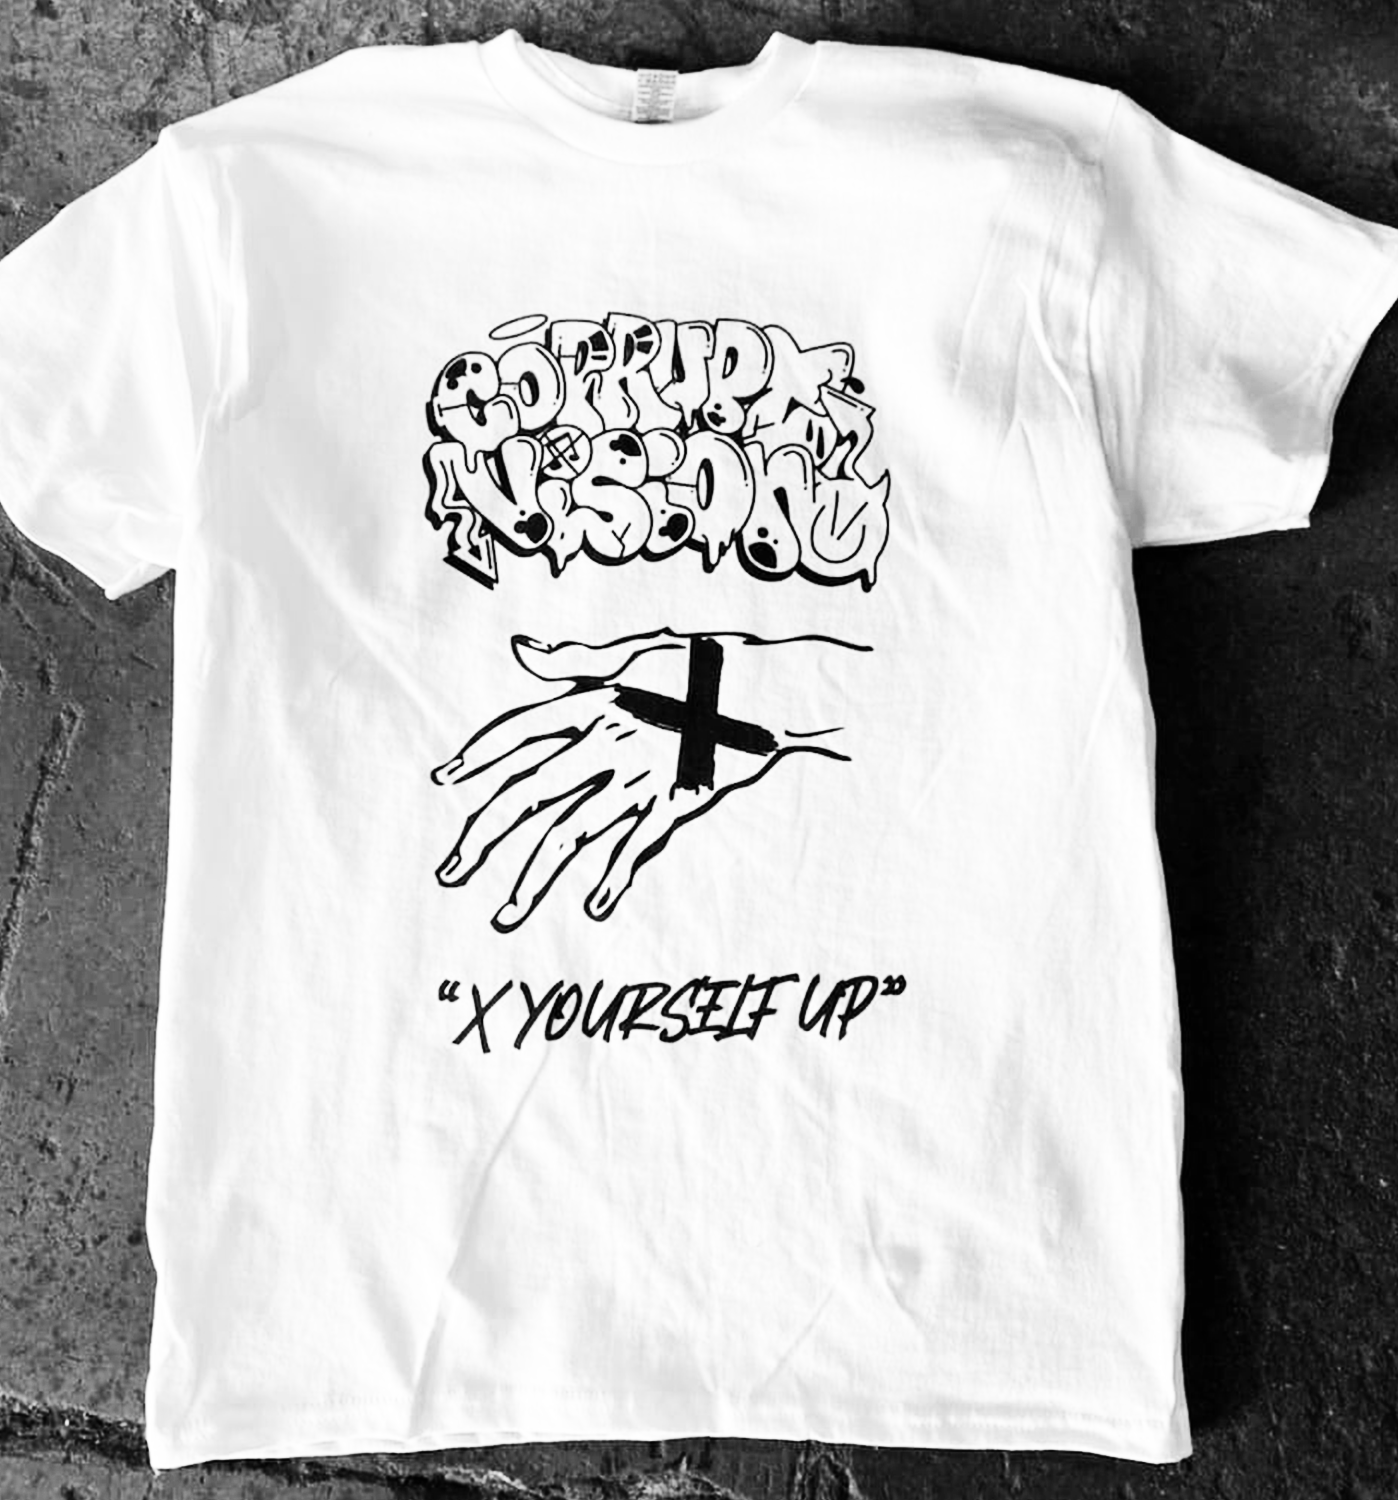 Corrupt Vision - "X YOURSELF UP" Shirt - SMALL - Click Image to Close